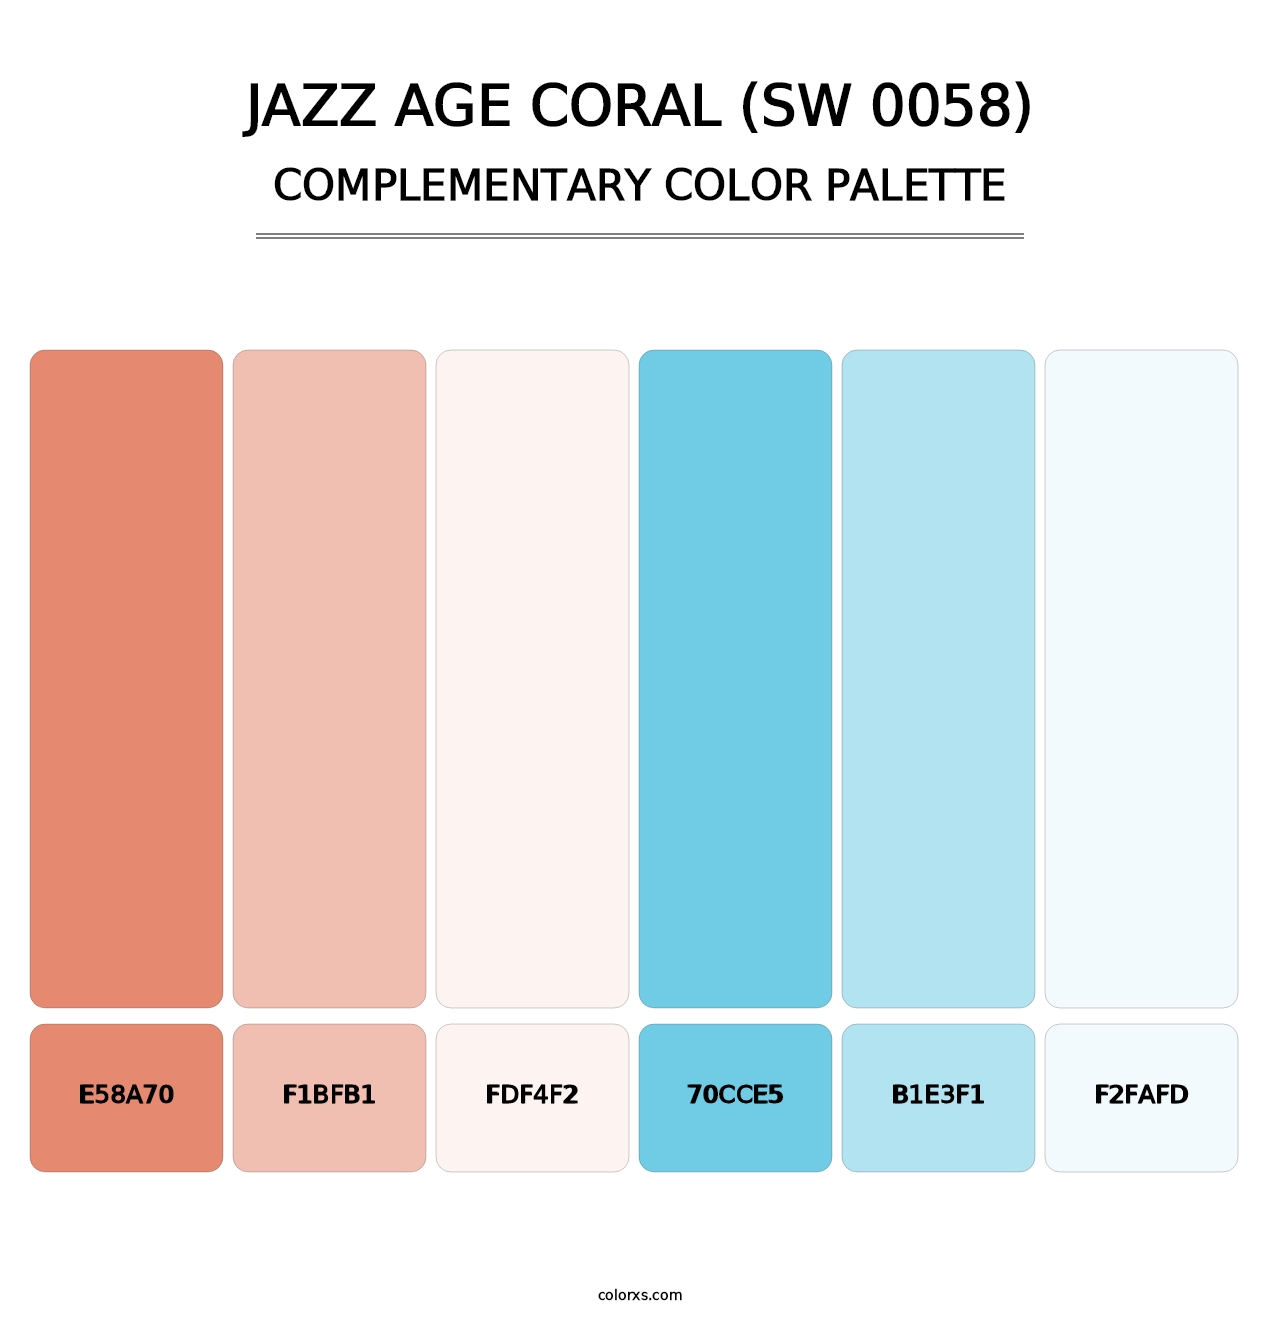 Jazz Age Coral (SW 0058) - Complementary Color Palette